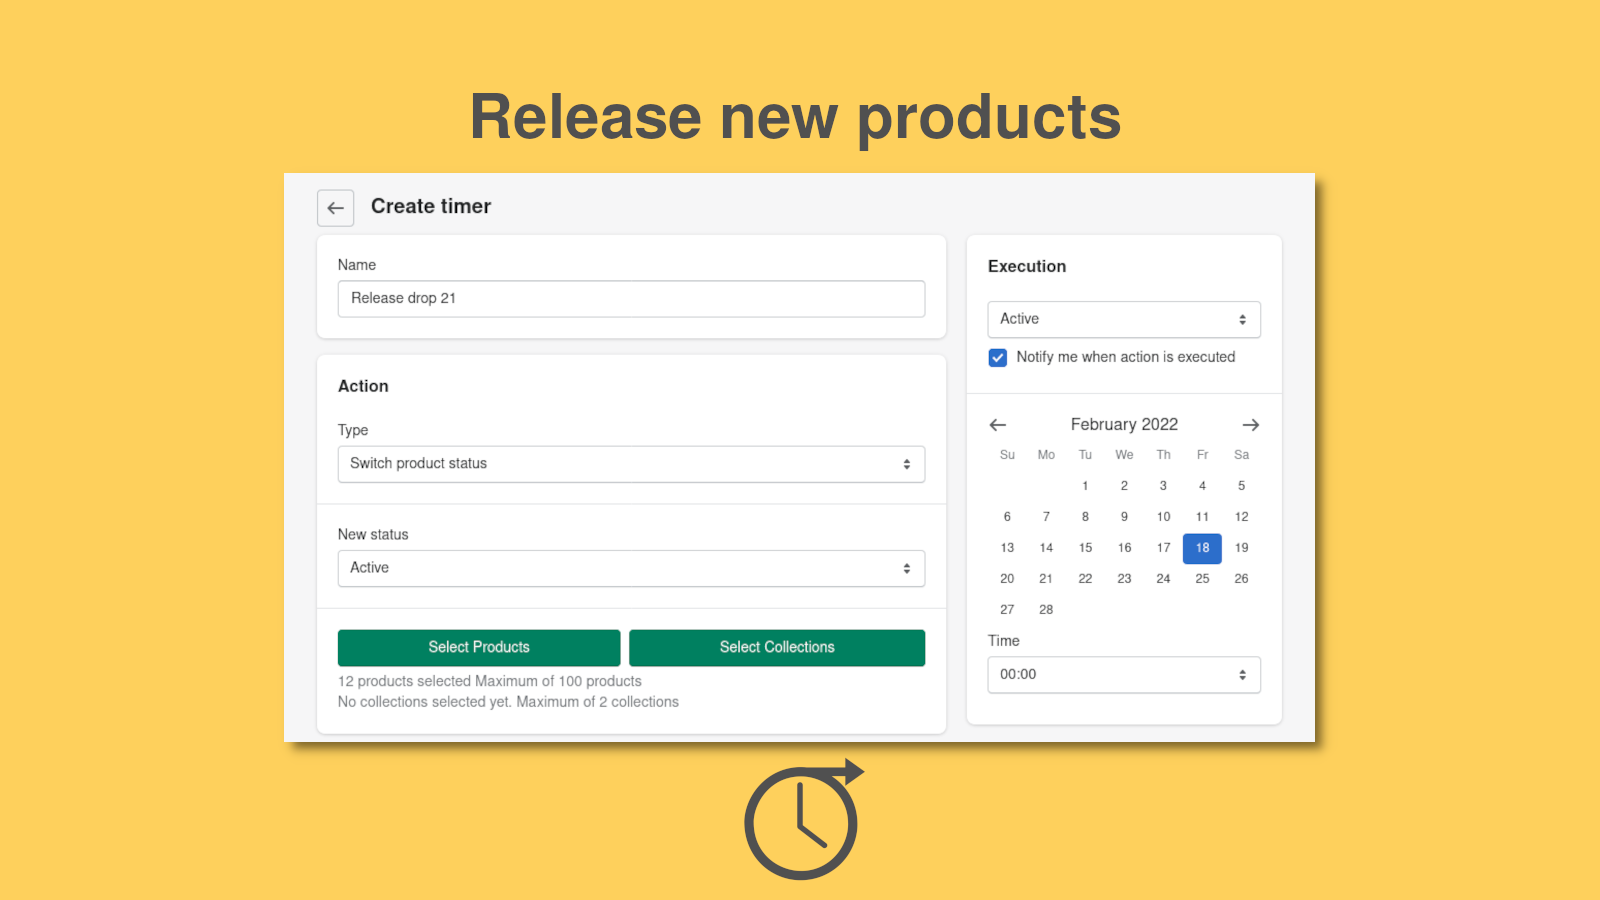 Release new products